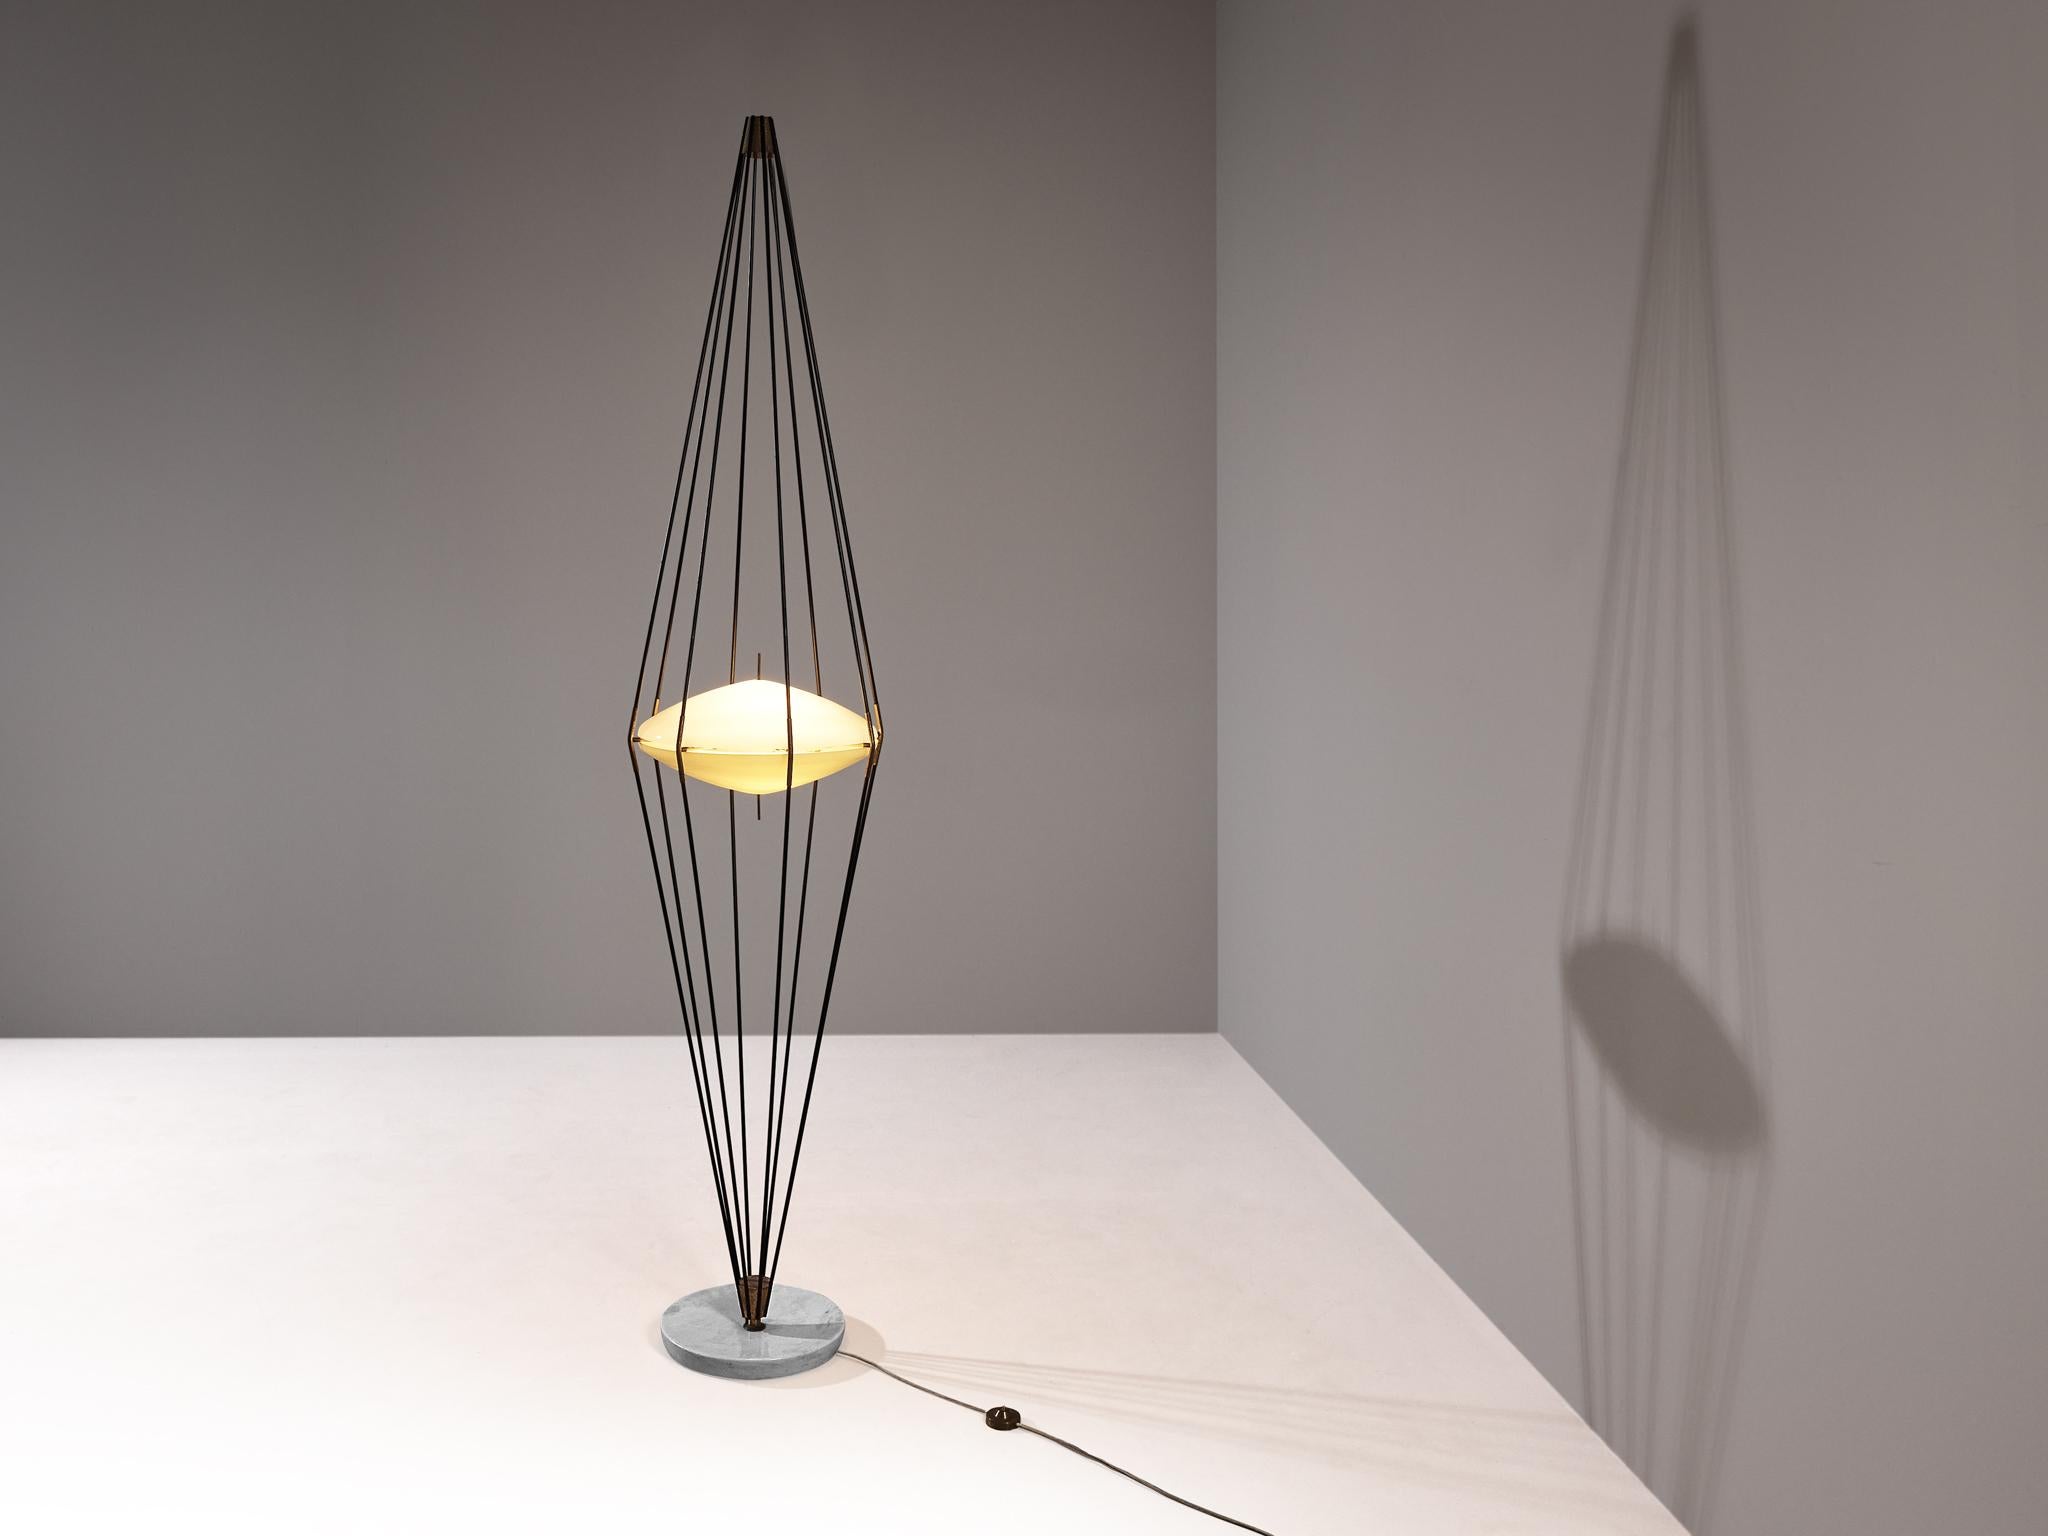 Angelo Lelli for Arredoluce, floor lamp 'Siluro', model '12628', Carrara marble, coated steel, brass, plexiglass, Italy, circa 1957

This floor lamp, designed by Angelo Lelii for Arredoluce in Italy around 1957, is a true masterpiece of Italian